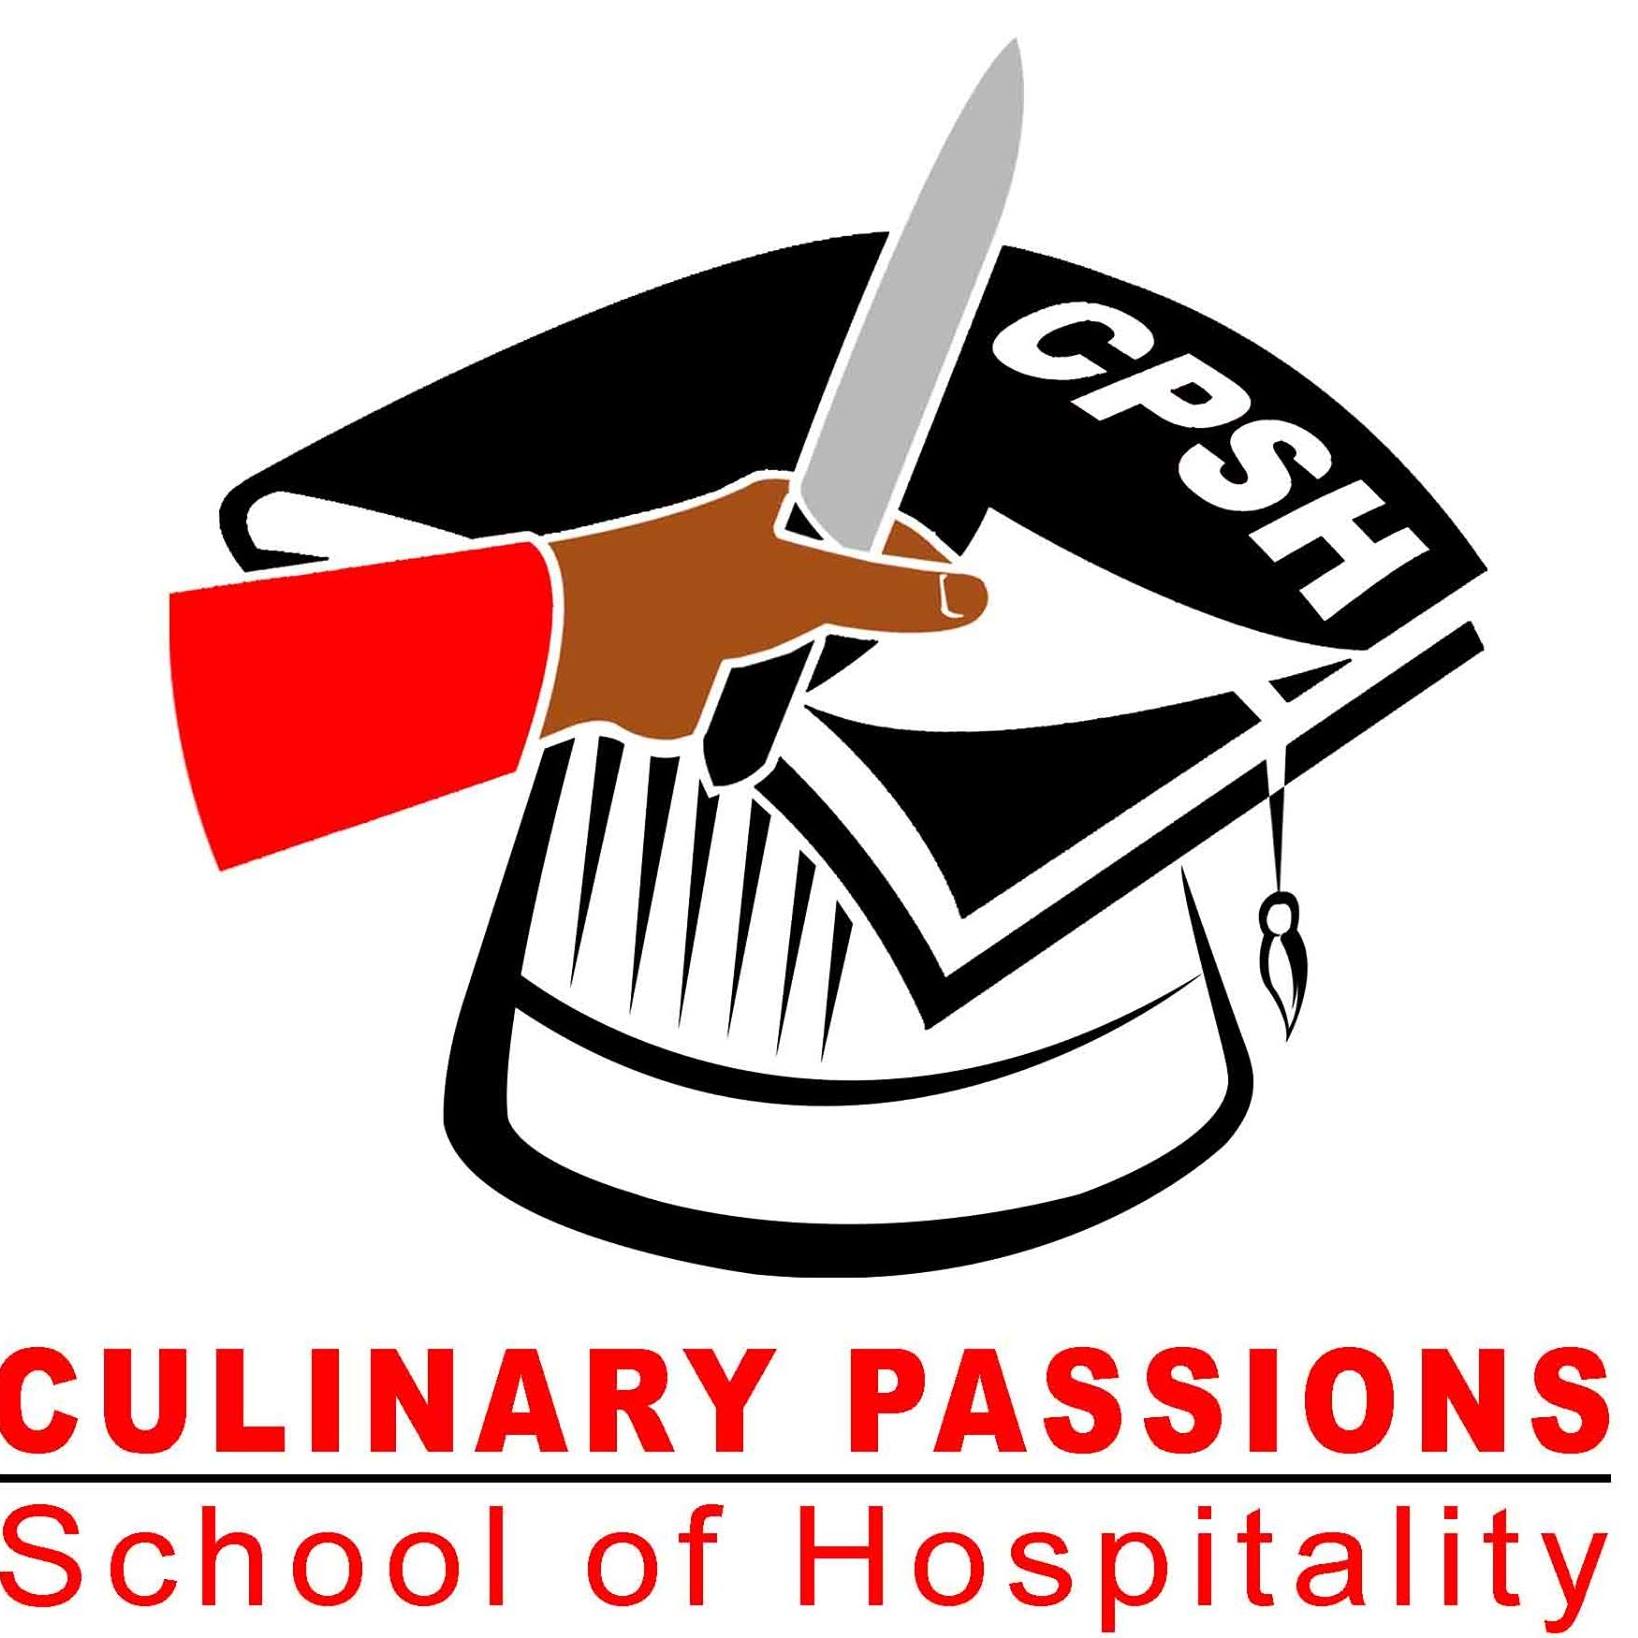 Culinary Passions School of Hospitality Logo